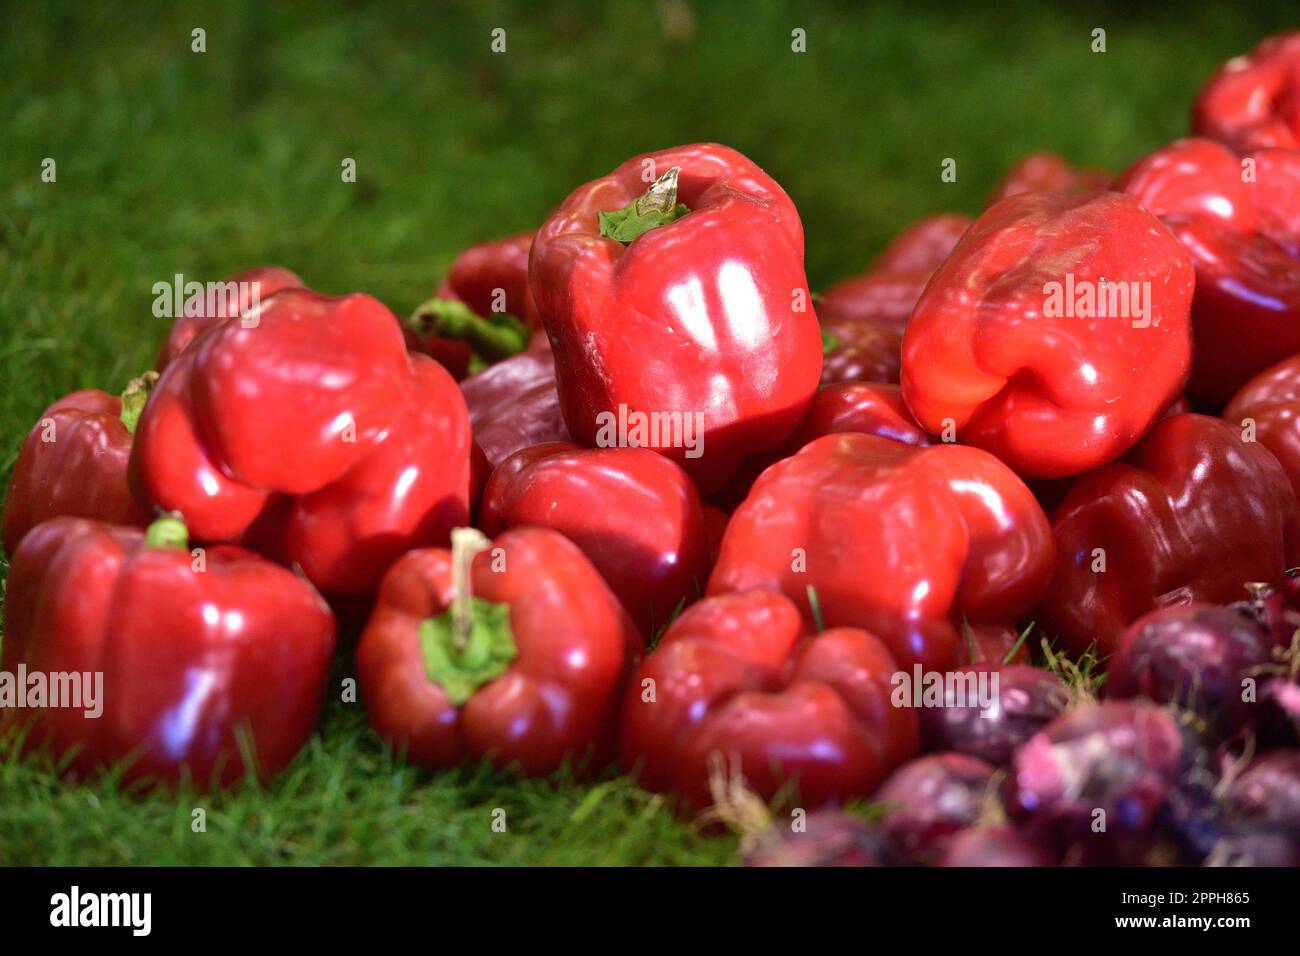 Decoration with different types of vegetables Stock Photo